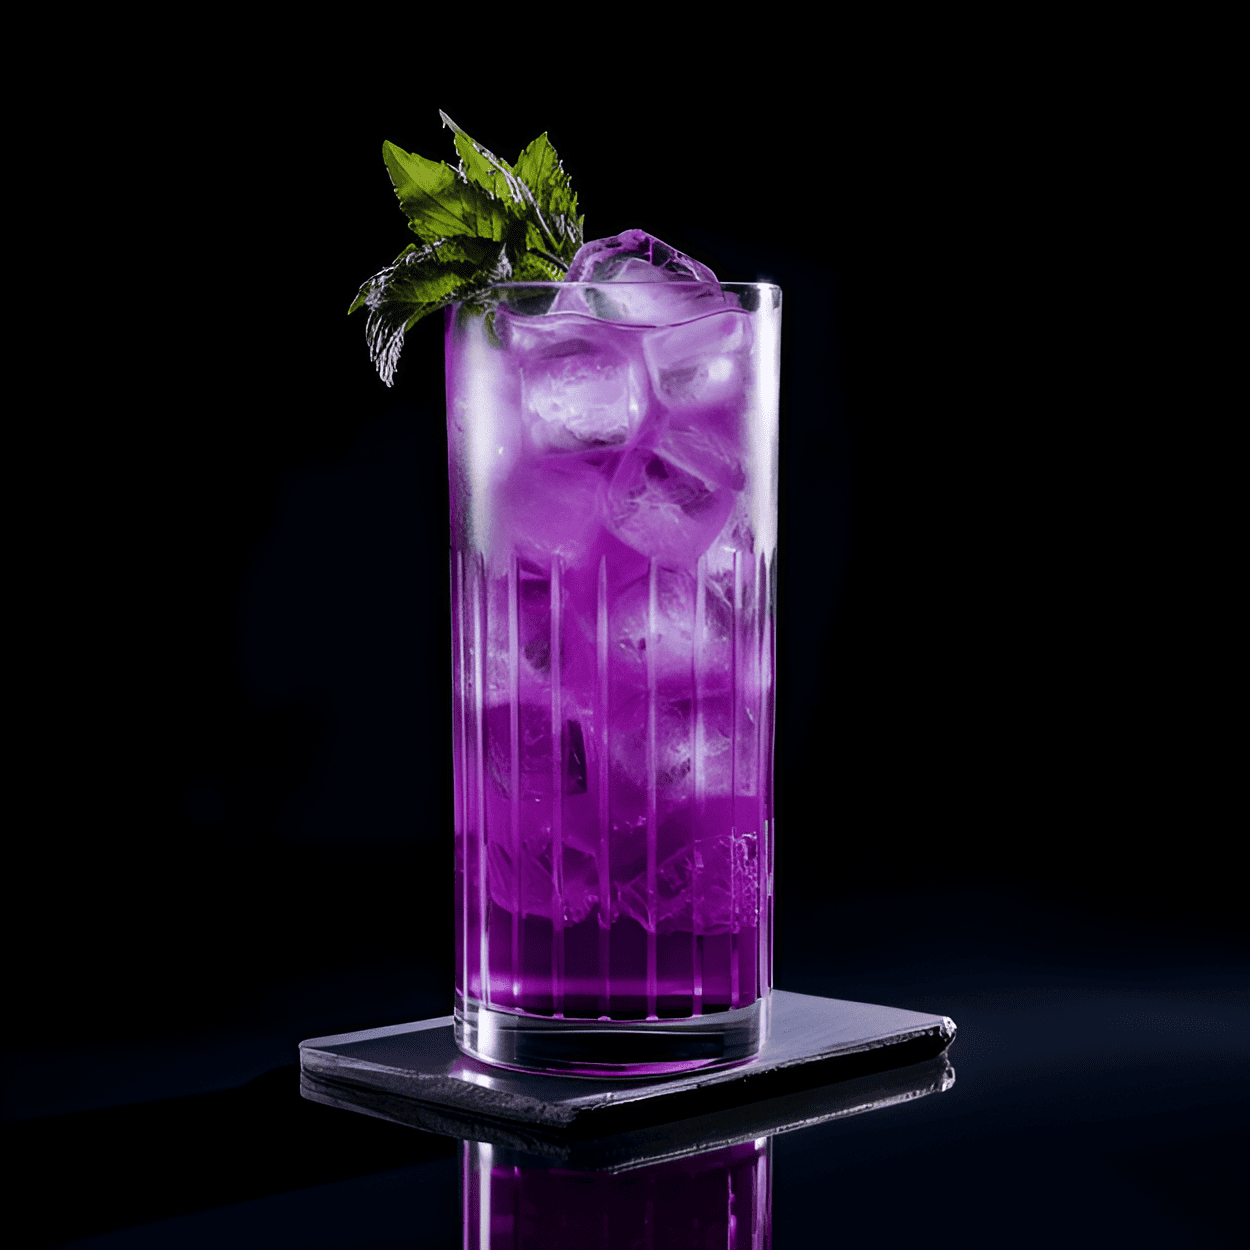 Purple Passion Cocktail Recipe - The Purple Passion is a sweet, fruity cocktail. It has a vibrant, tangy taste with a hint of citrus. The cocktail is light and refreshing, making it a great choice for a hot summer day.